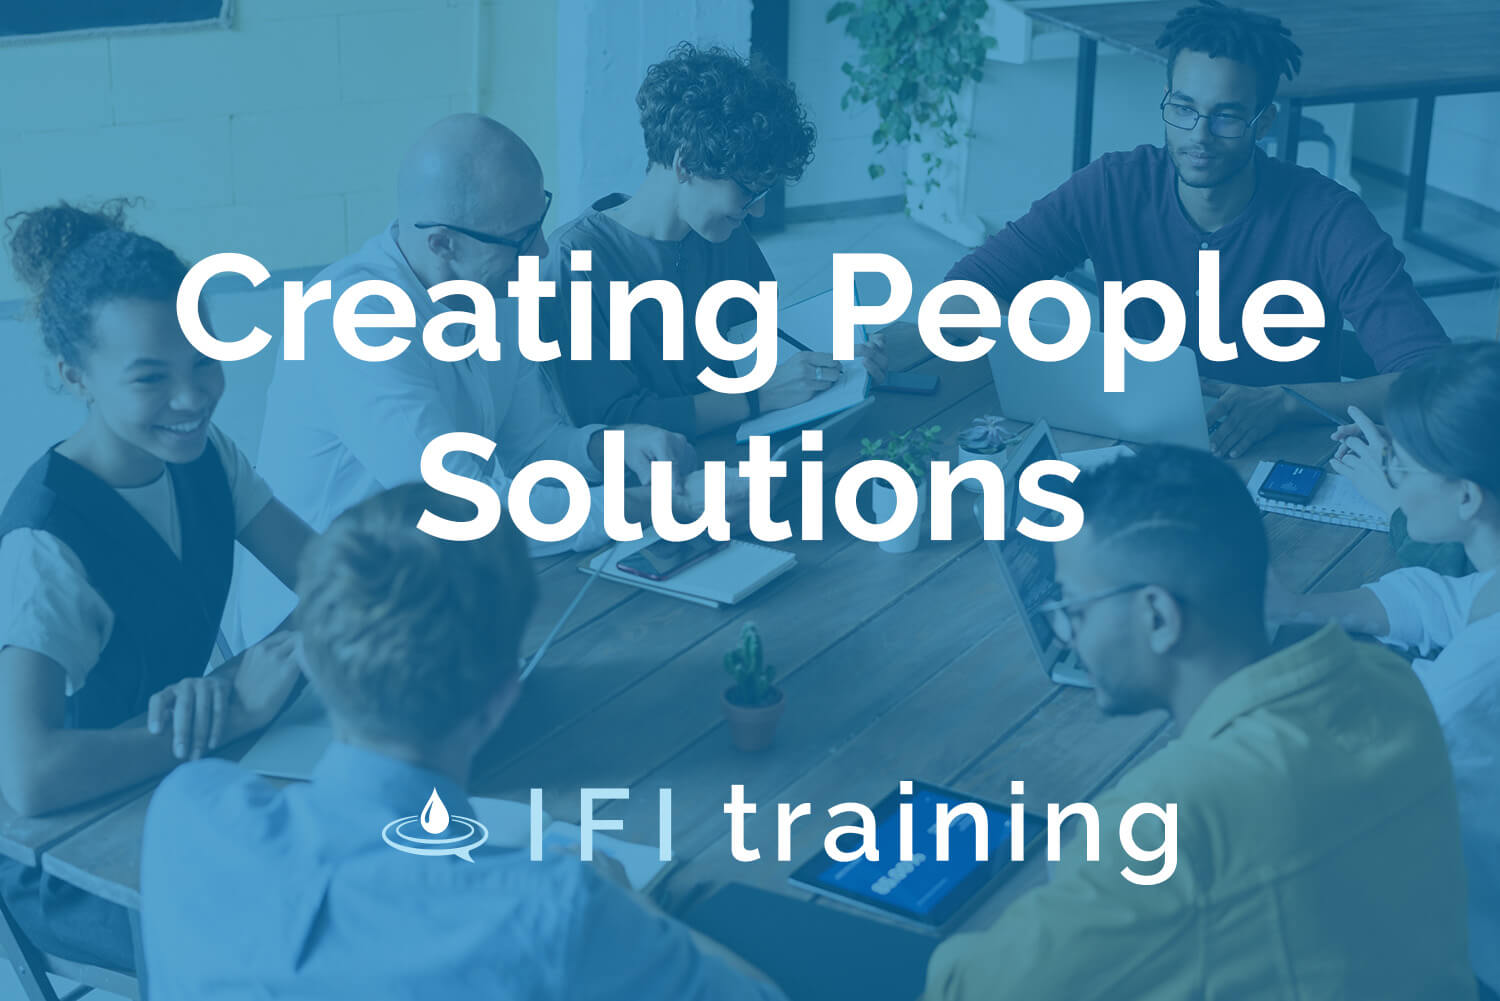 Creating People Solutions Image